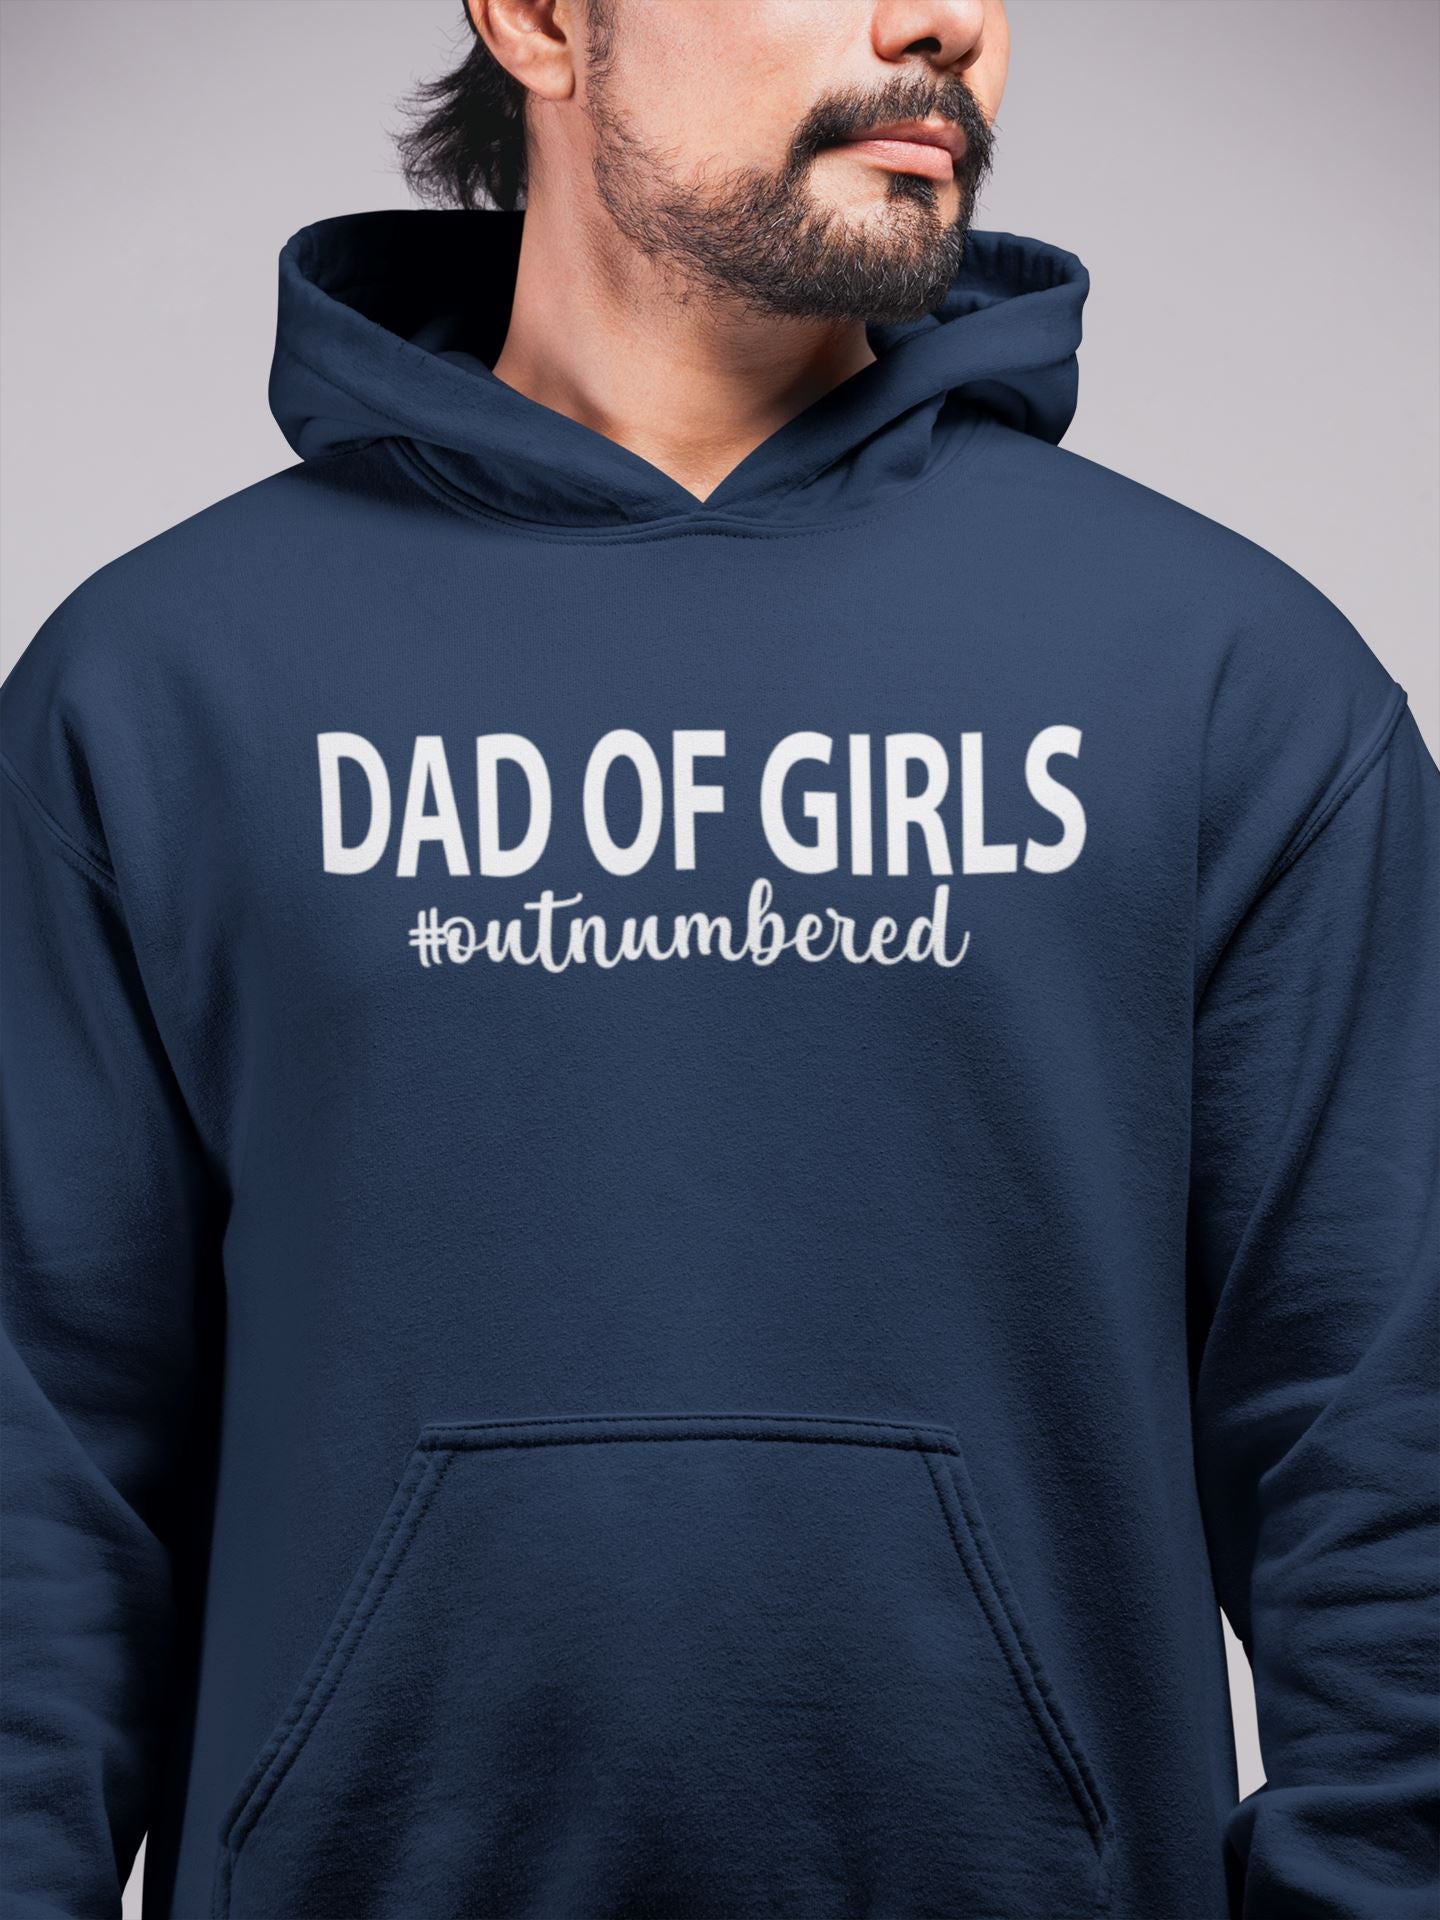 Dad of Girls #outnumbered Hoody